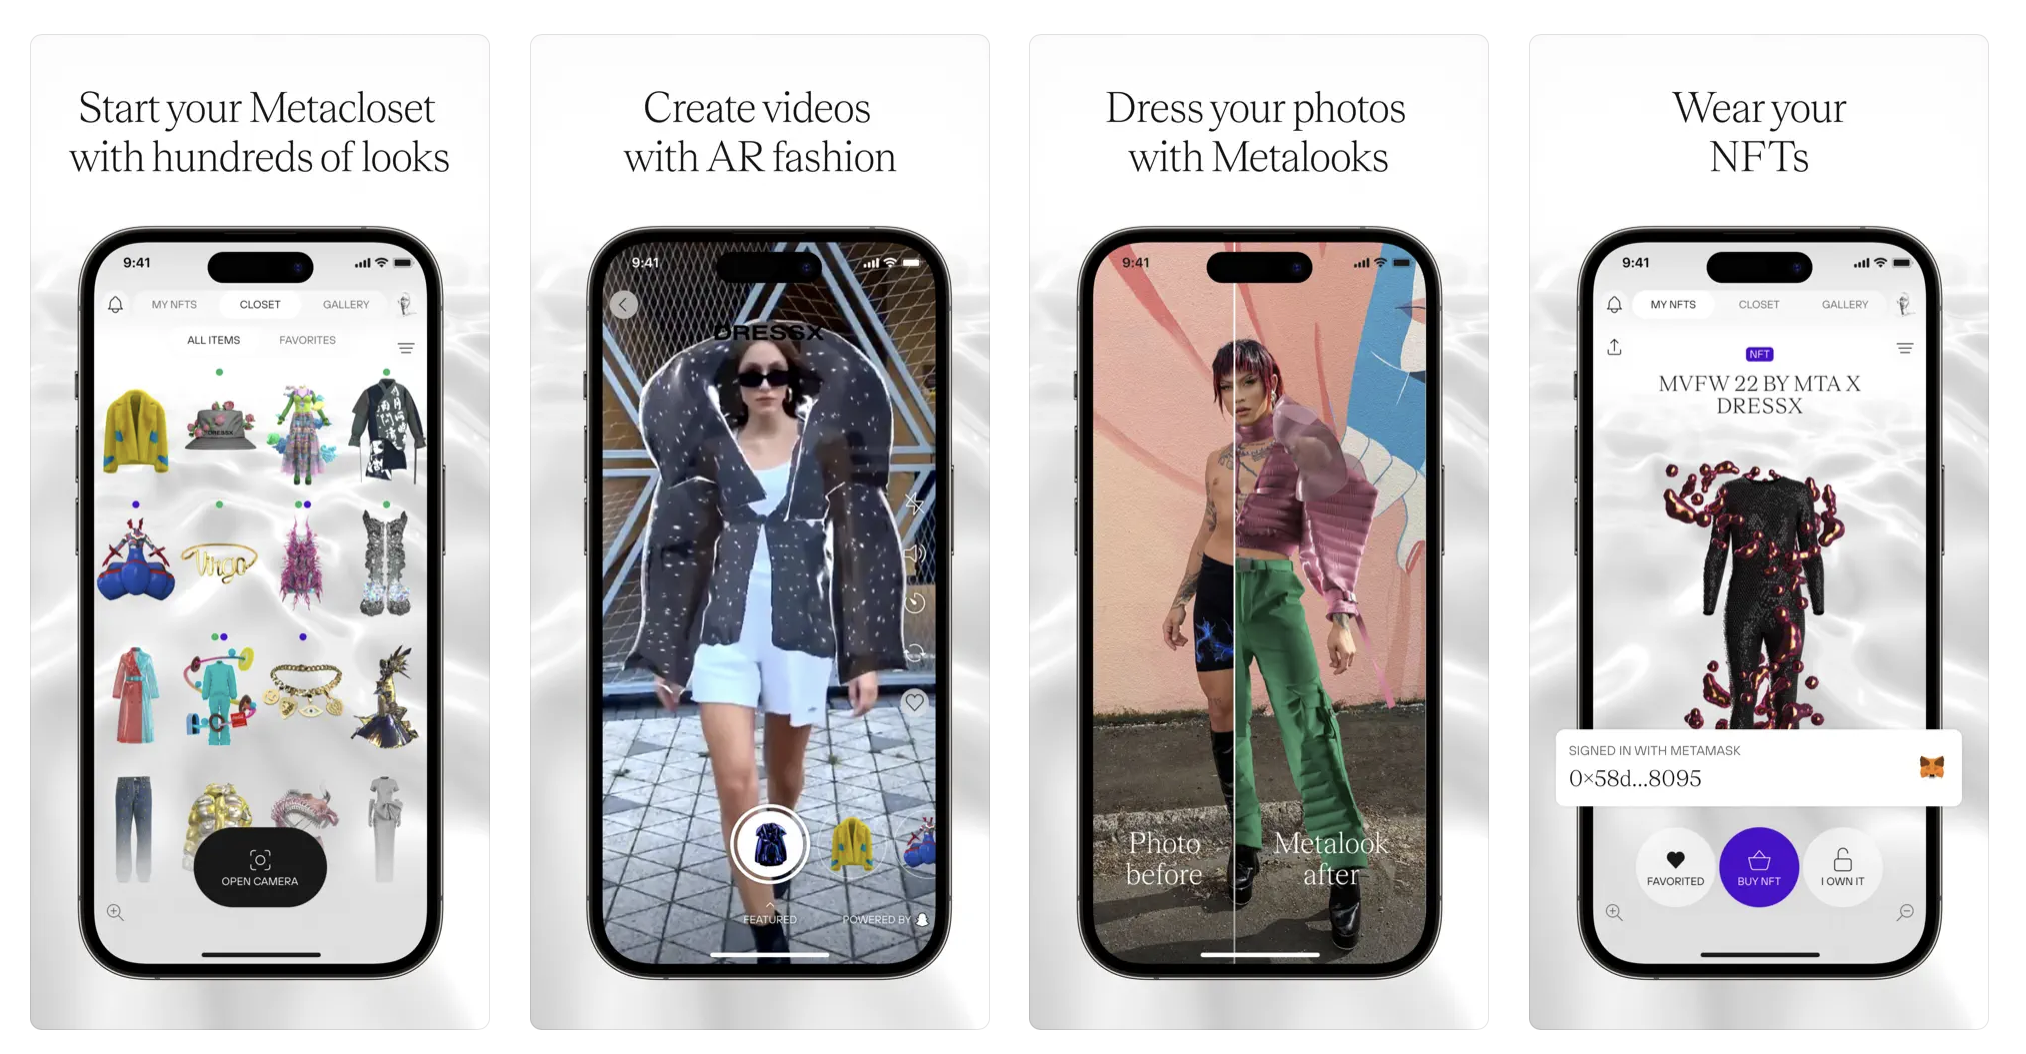 DressX, a Virtual Fashion Platform Based in the United States, Completes $15 Million Series a Financing Round